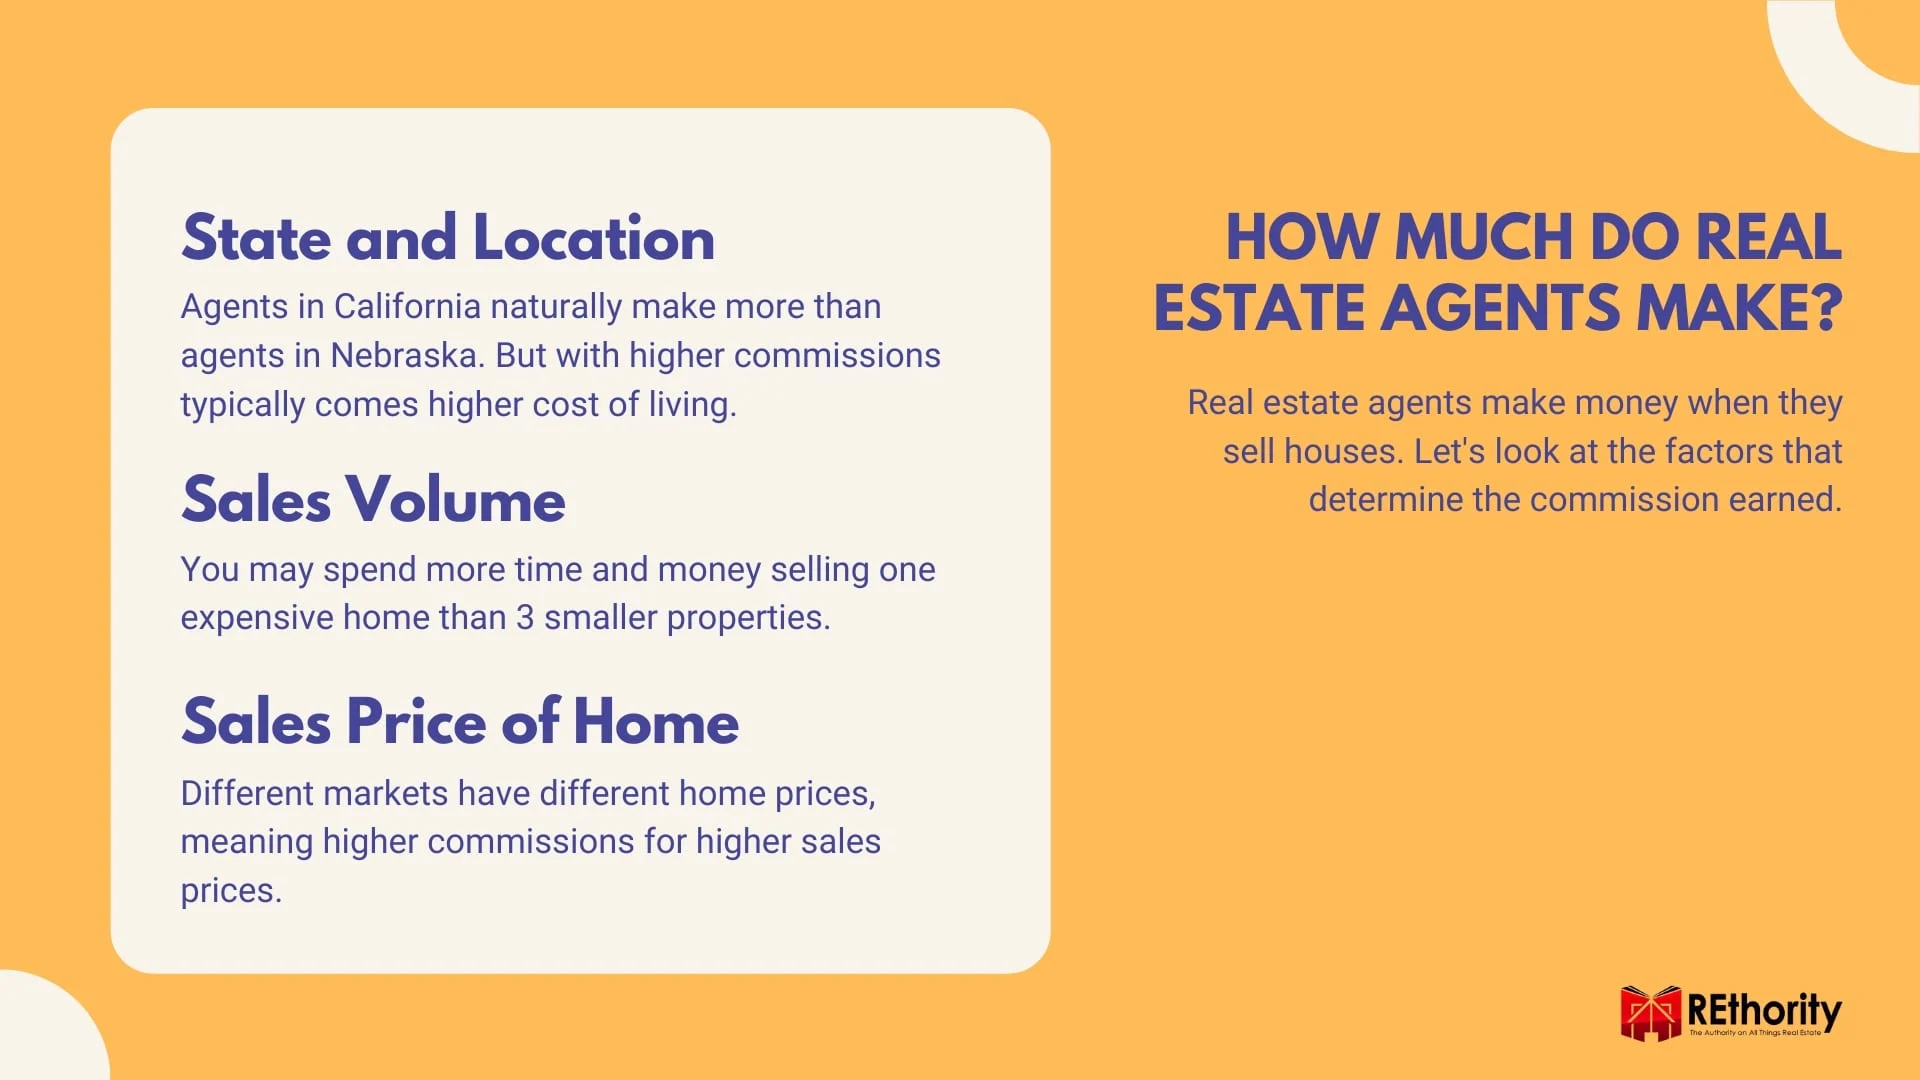 How much do real estate agents make graphic